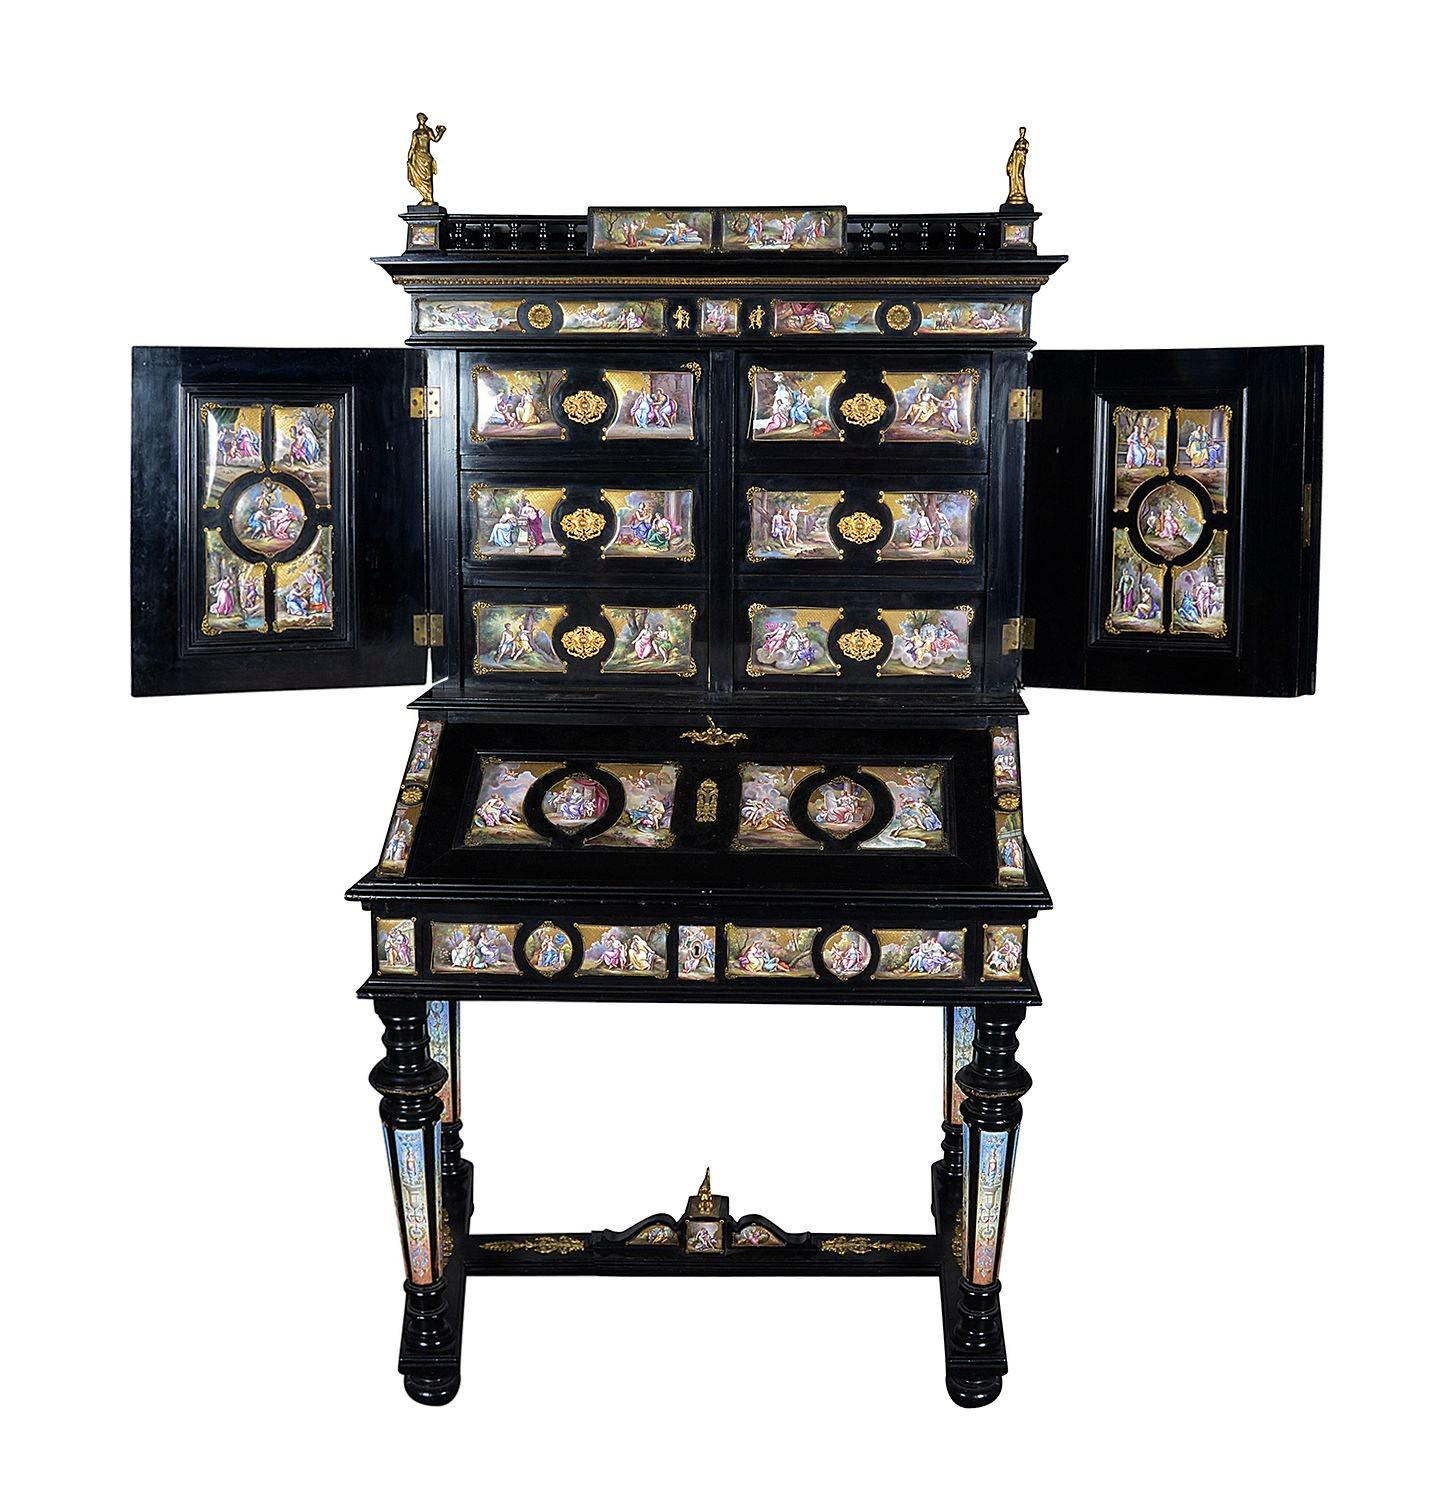 A fine quality Viennese late 19th century, gilt-bronze and enamel mounted ebonised bureau-cabinet

decorated all-over with shaped enamel plaques depicting mythological scenes, interspersed by pierced enamelled gilt-metal mounts, surmounted by a